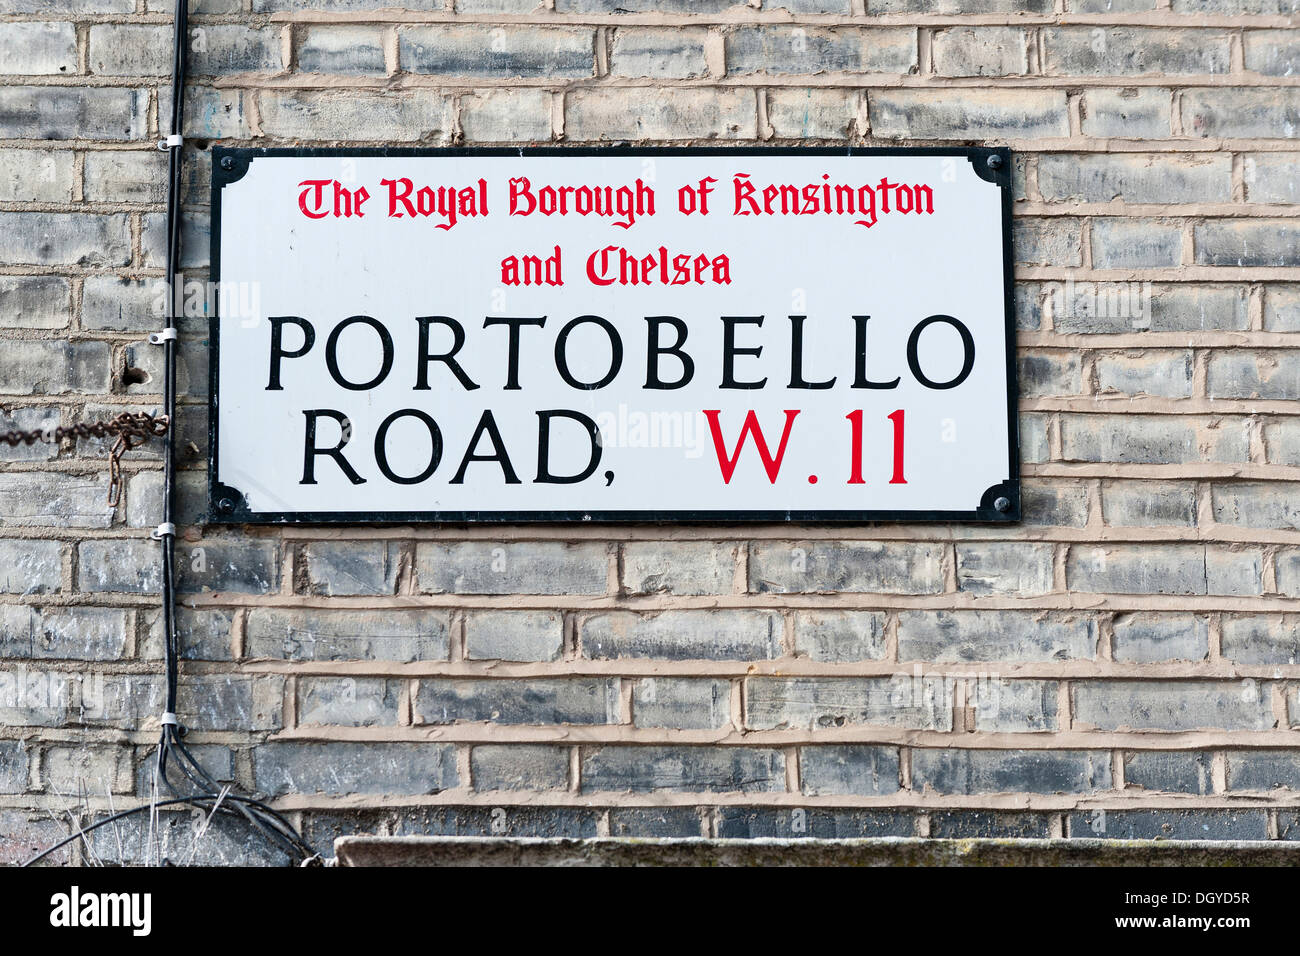 Road sign, Portobello Road, Notting Hill, Londres, Angleterre, Royaume-Uni, Europe Banque D'Images